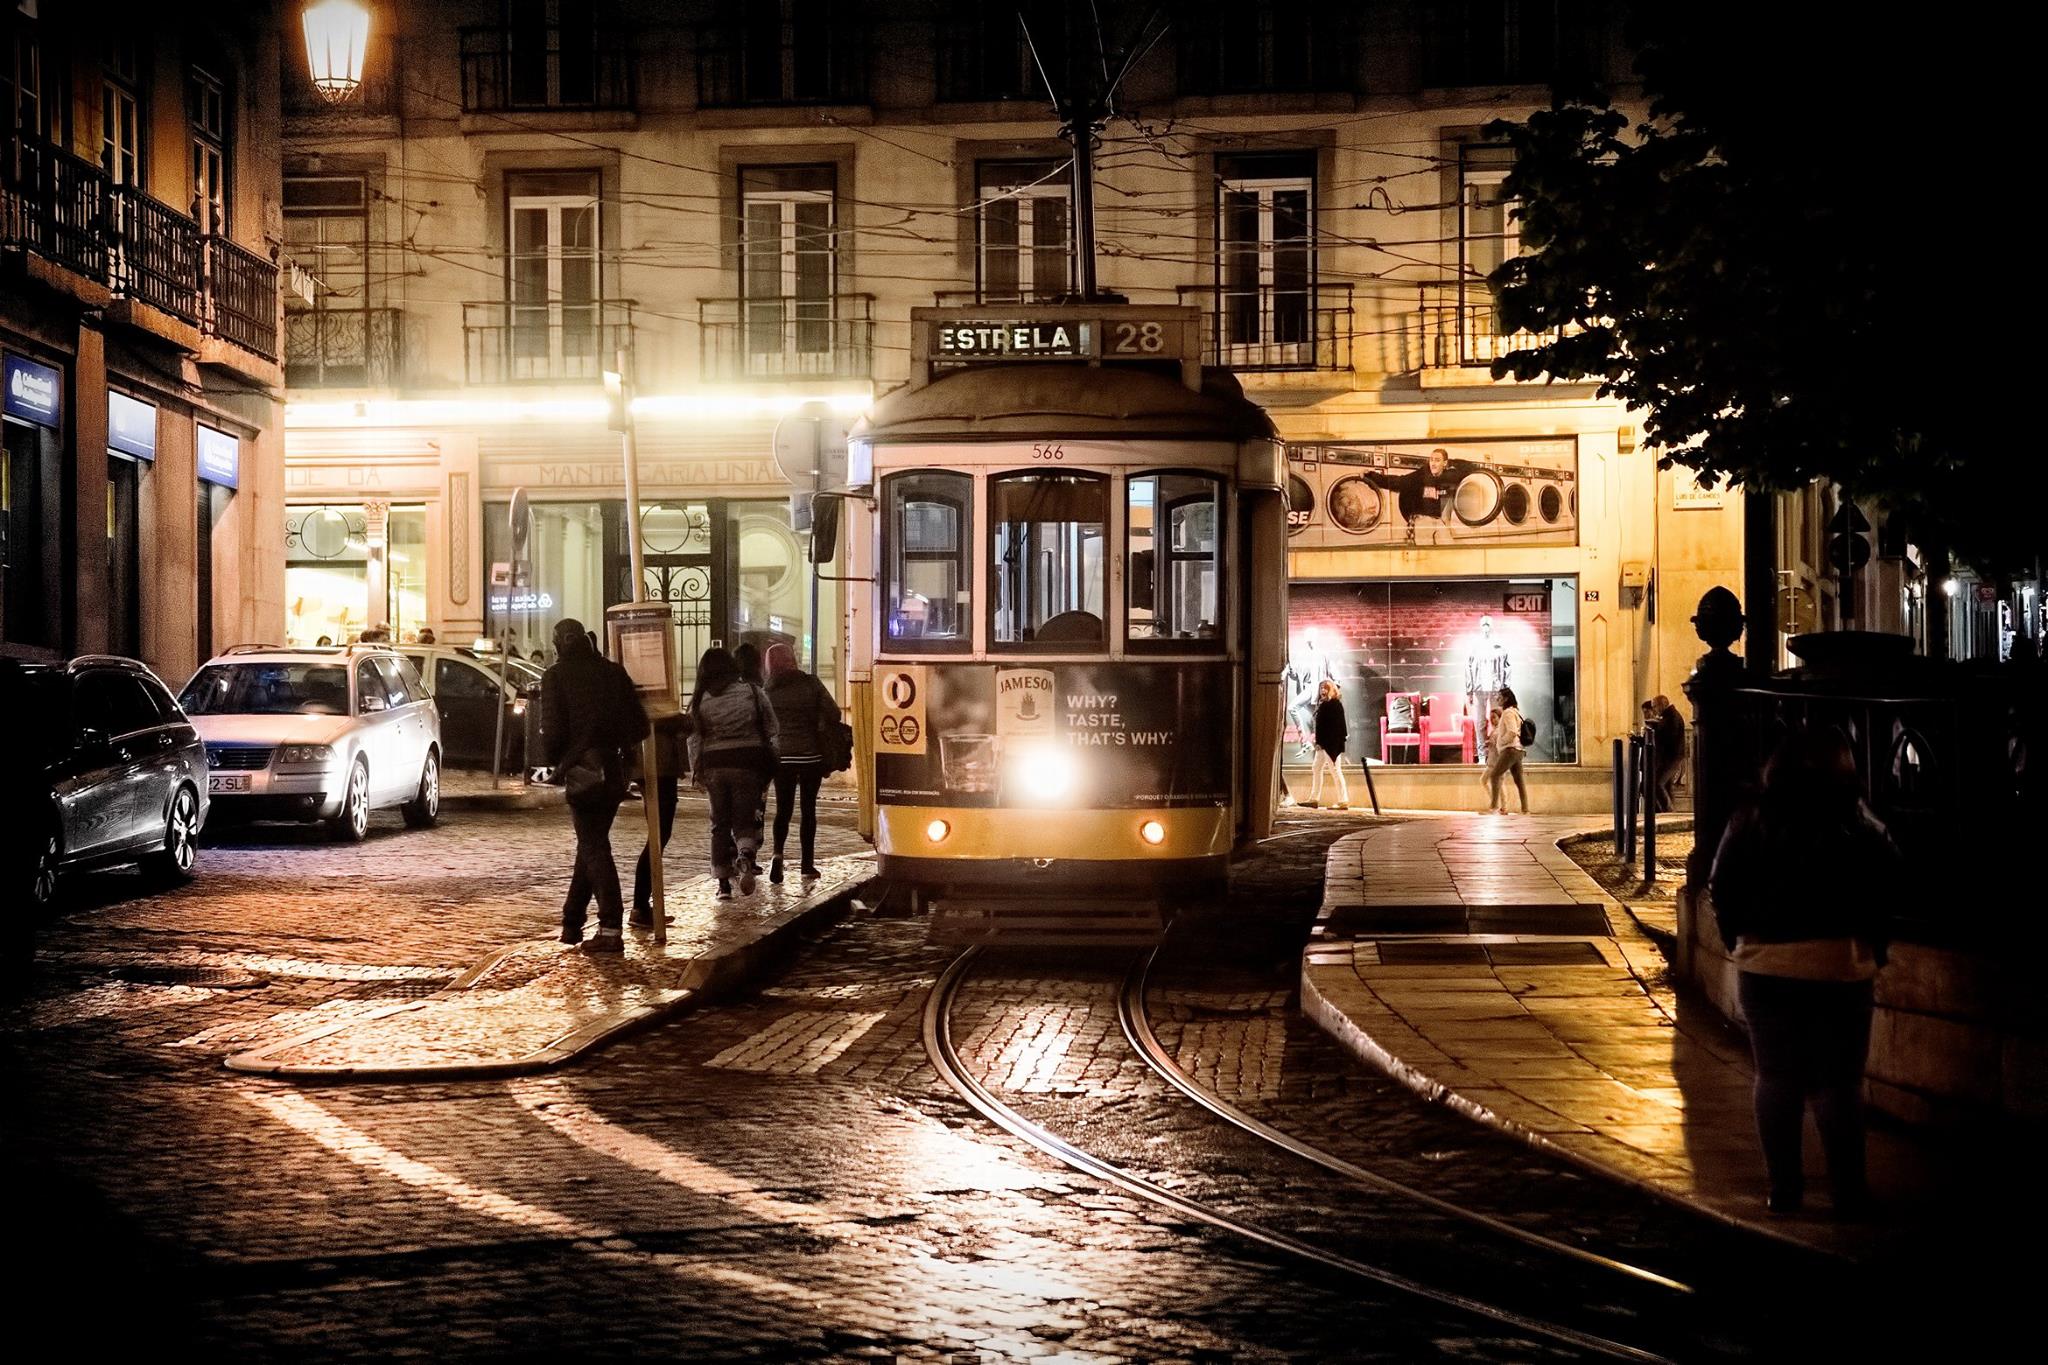 A rare occurrence: Lisbon's iconic tram 28 spotted empty after a long, crowded day.